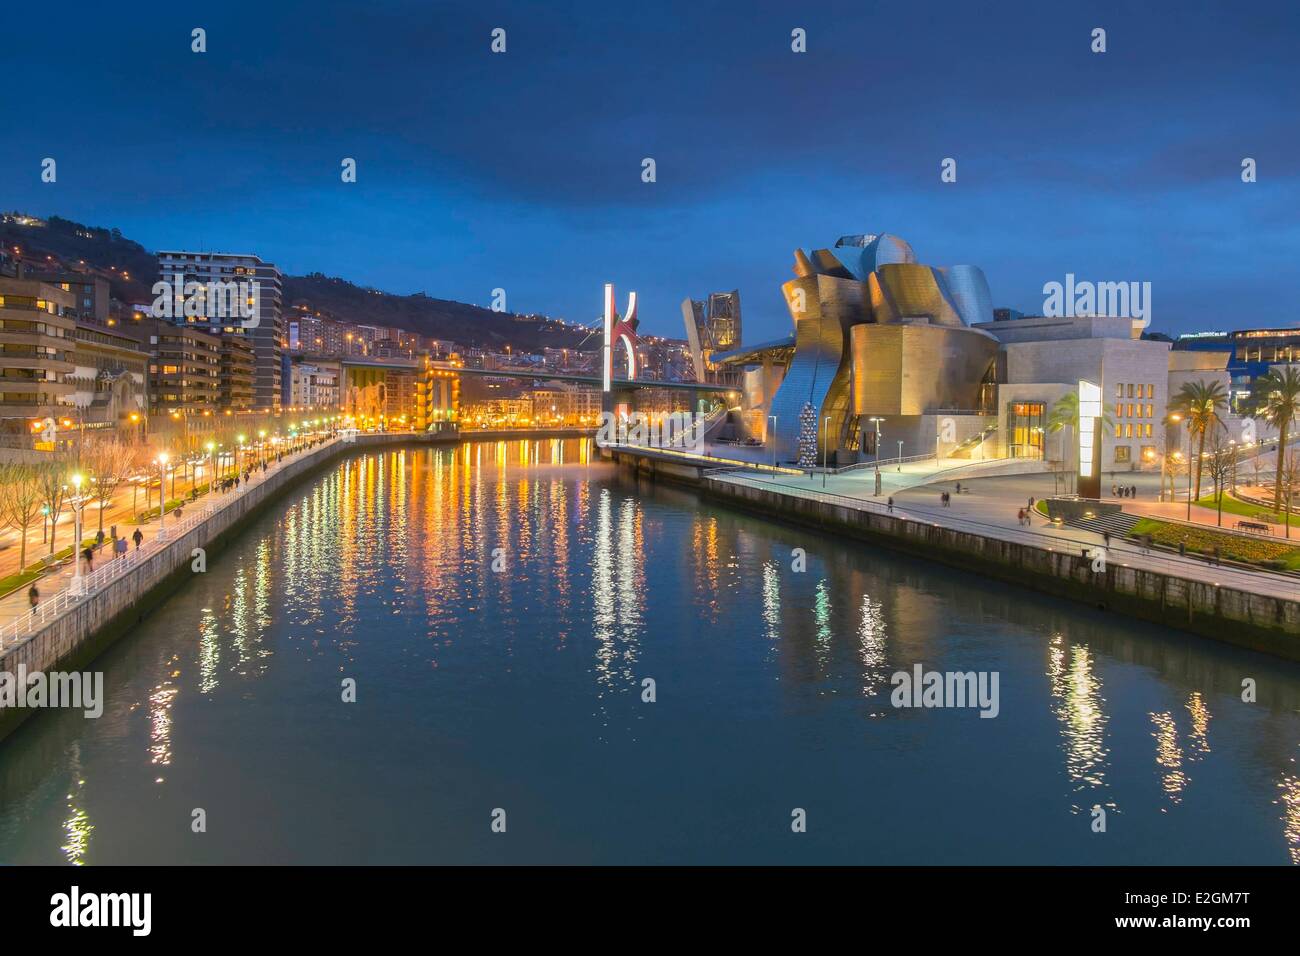 Spain Basque Country Region Vizcaya Province Bilbao Guggenheim Museum by architect Frank Gehry and Salve bridge with Les Arches Rouges artpiece by French artist Daniel Buren Stock Photo